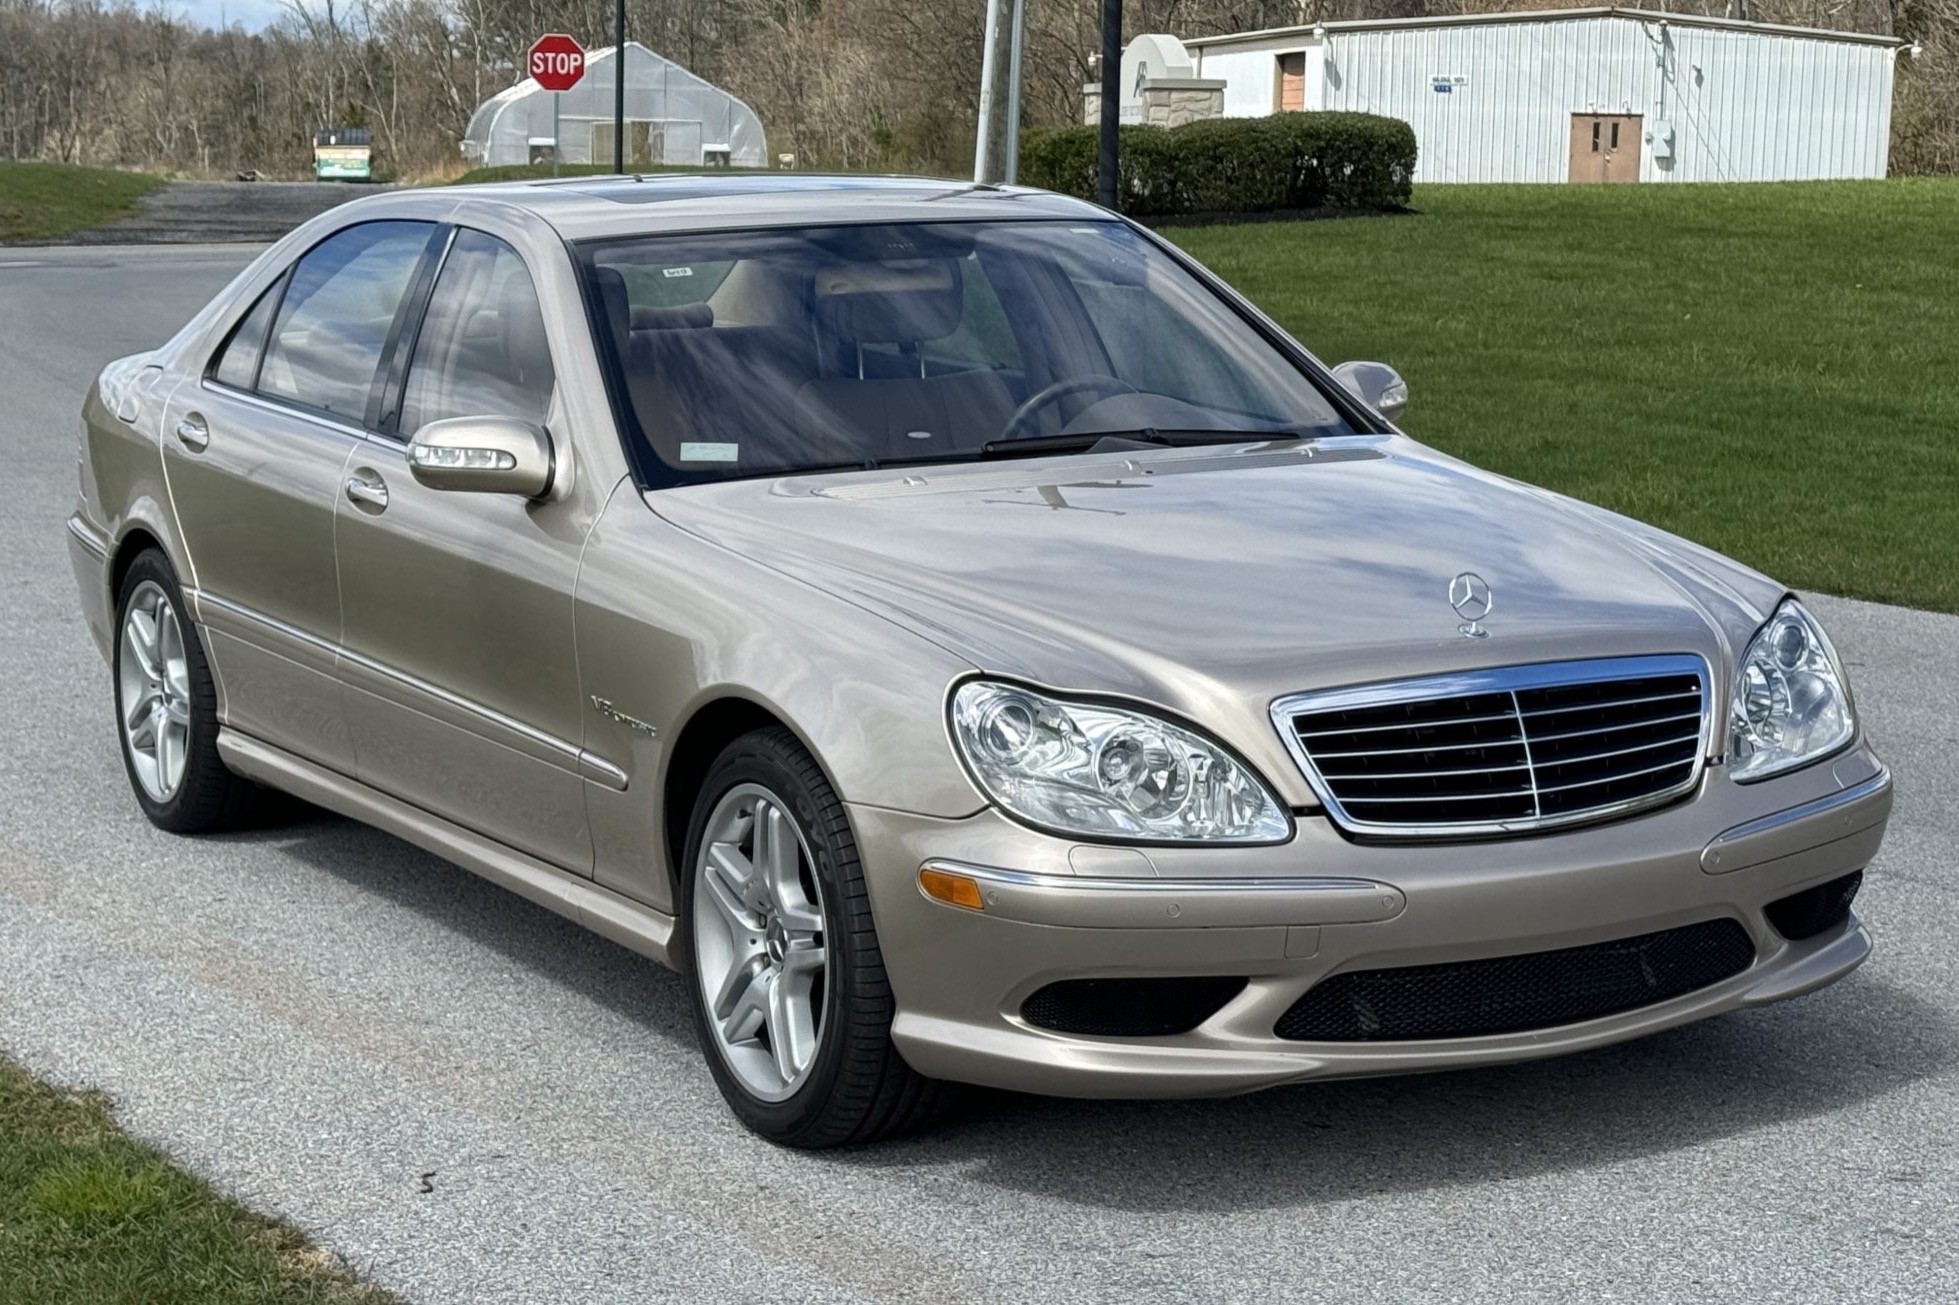 Used 2005 Mercedes-Benz S55 AMG Review